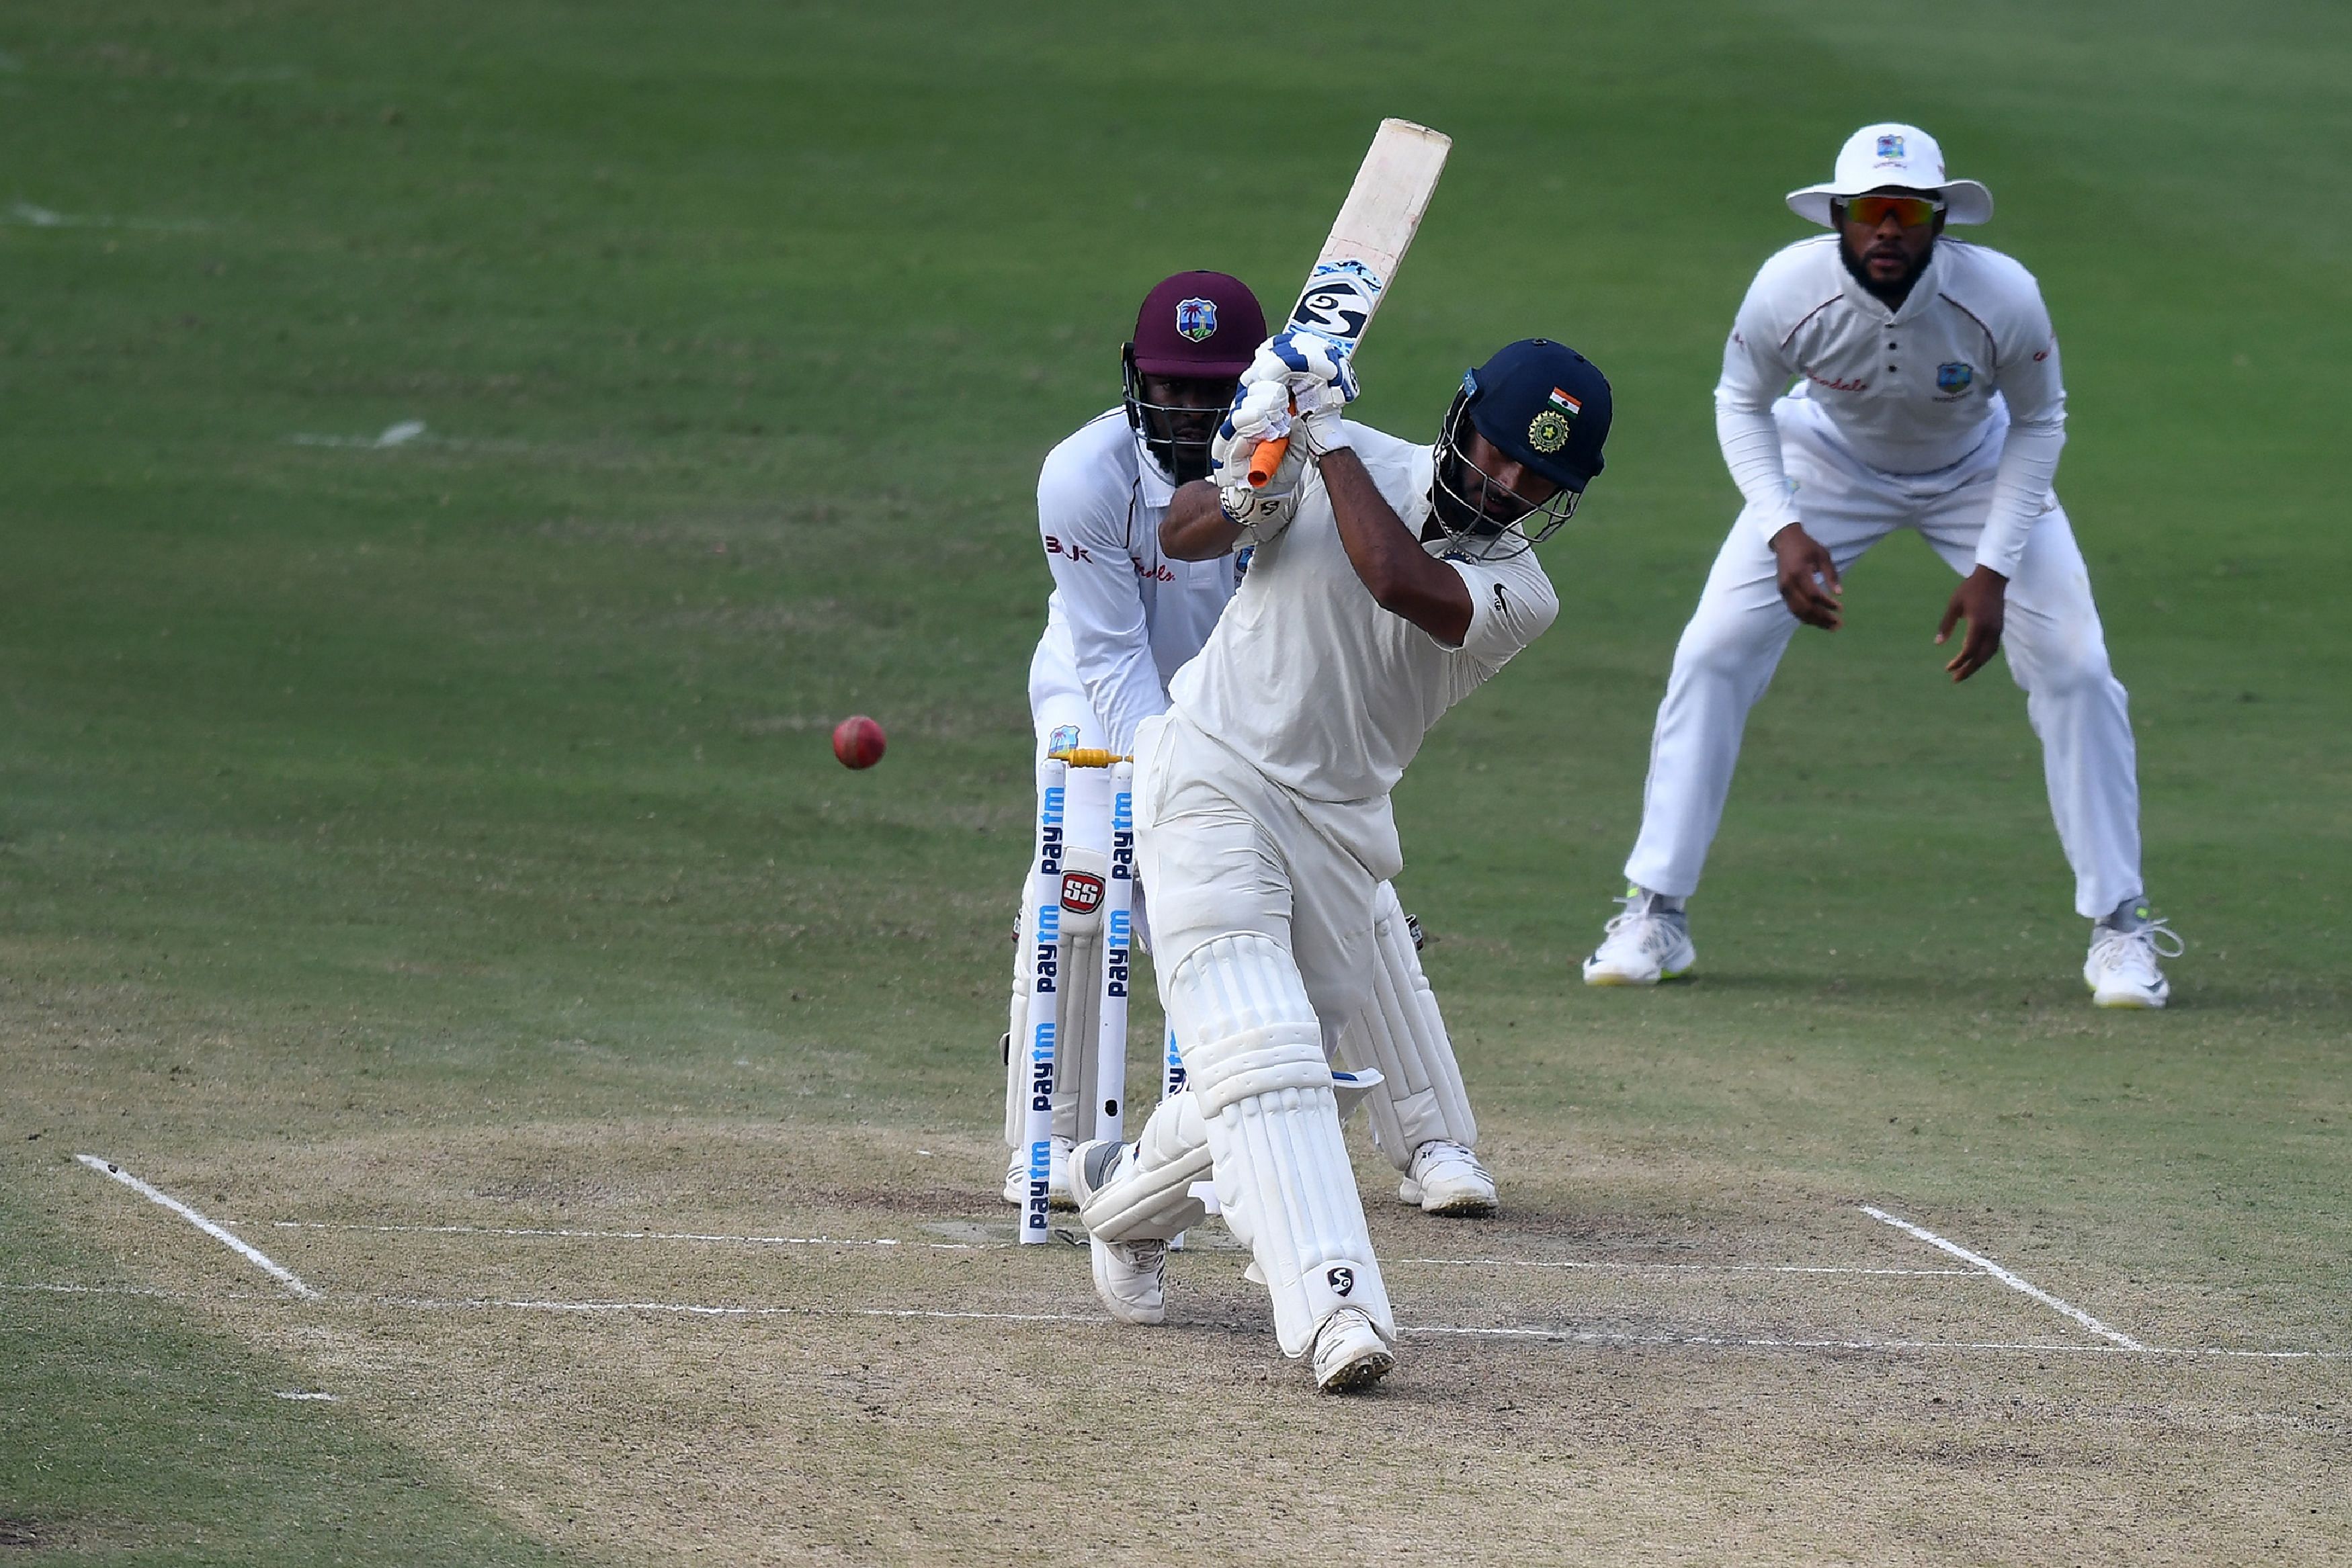 India's Rishabh Pant smacks one to the boundary during his unbeaten 85 against West Indies on Saturday. AFP